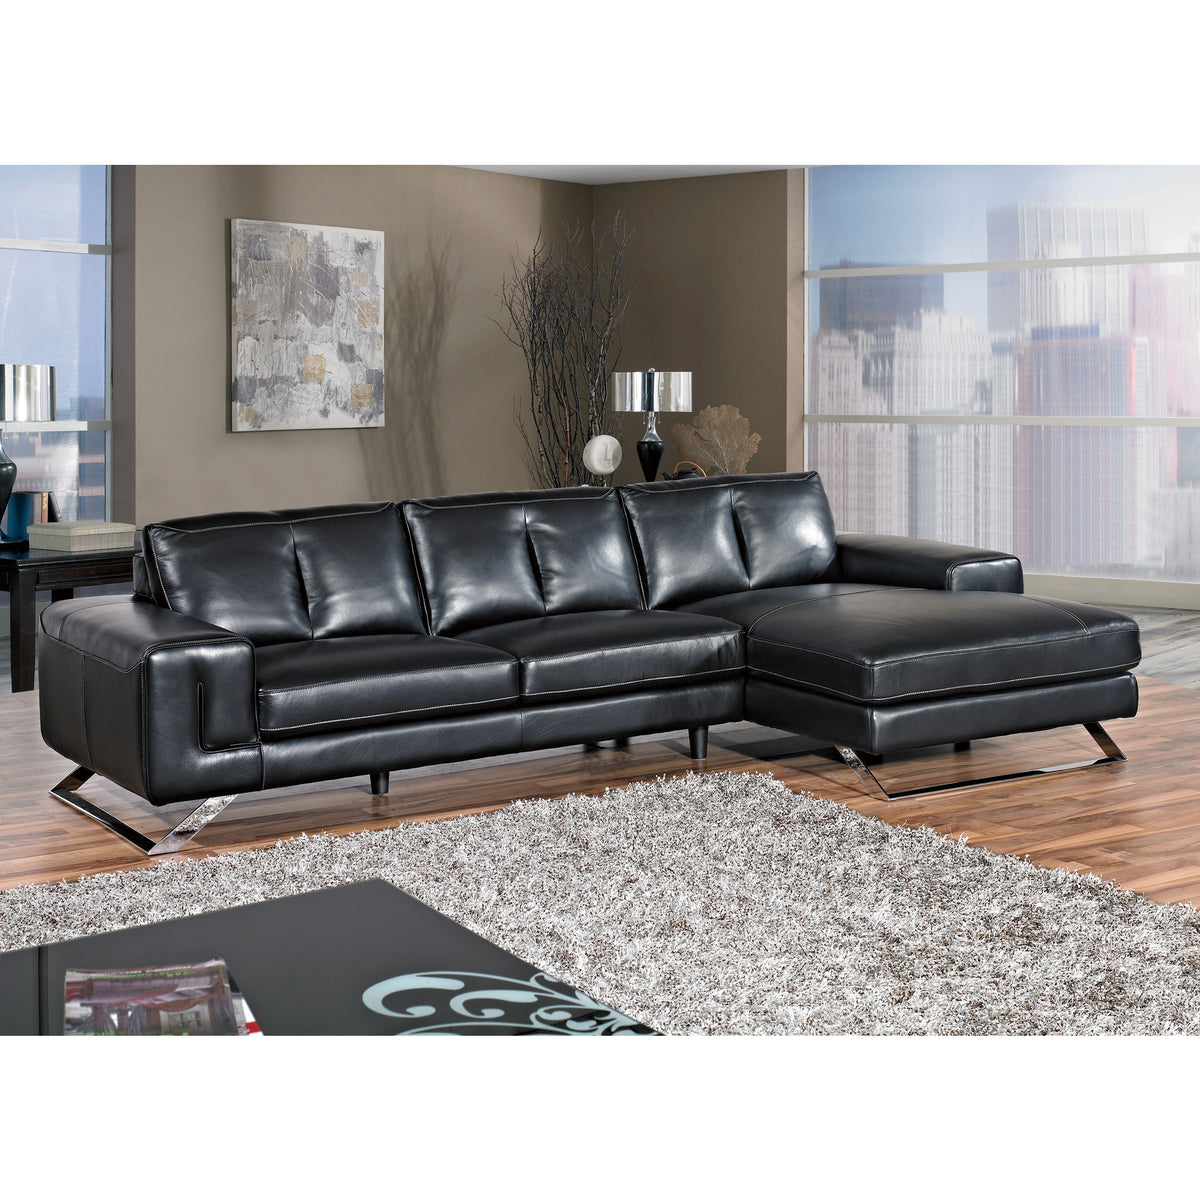 Cortesi Home Contemporary Manhattan Genuine Leather Sectional Sofa with Right Facing Chaise Lounge, Black 116&quot; Wide